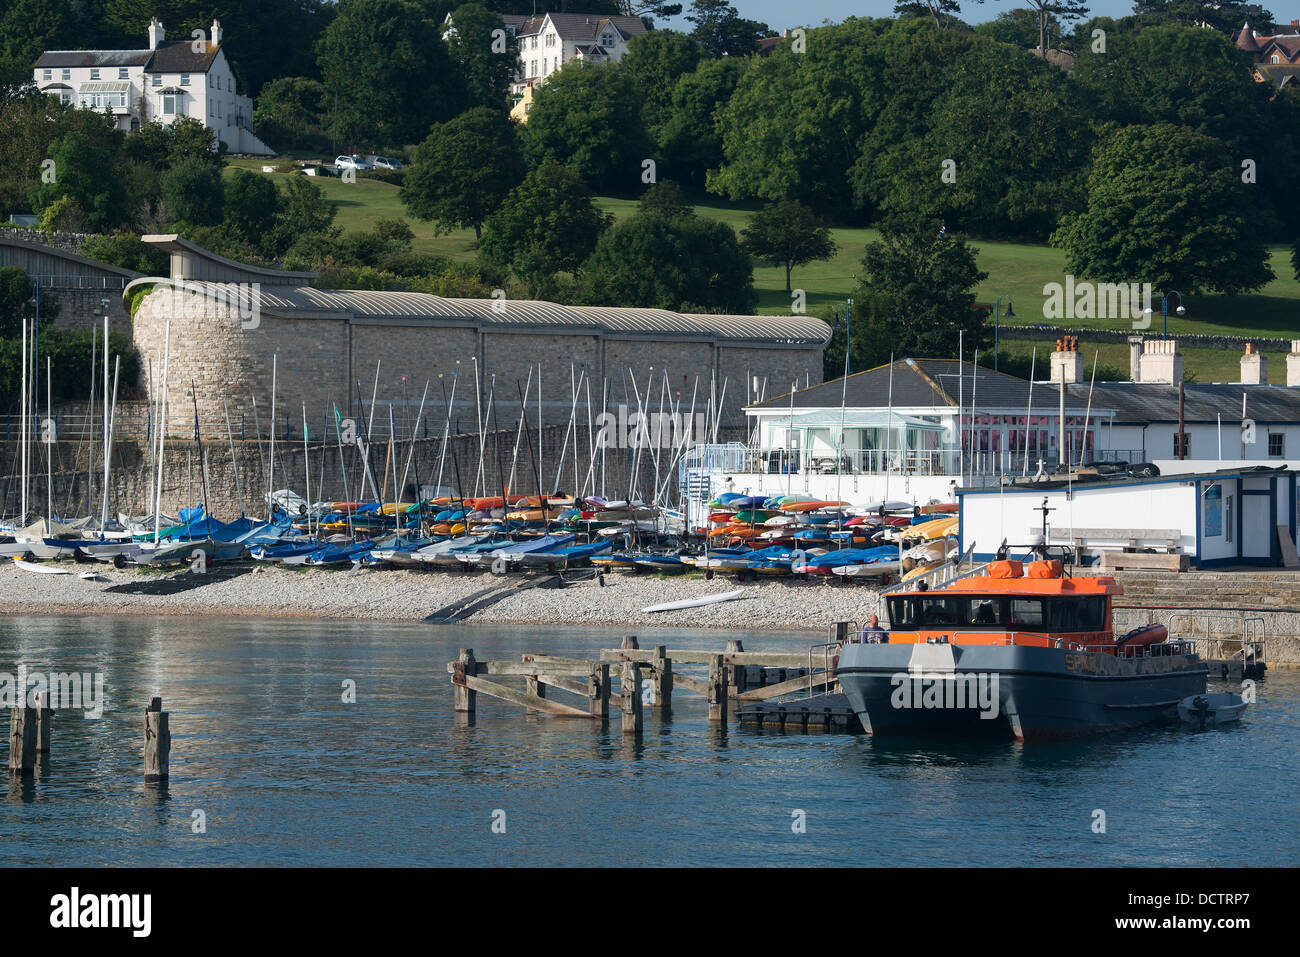 A view of the Swanage yacht club as seen from the pier. An orange and grey dive boat can be seen moored in the foreground near t Stock Photo